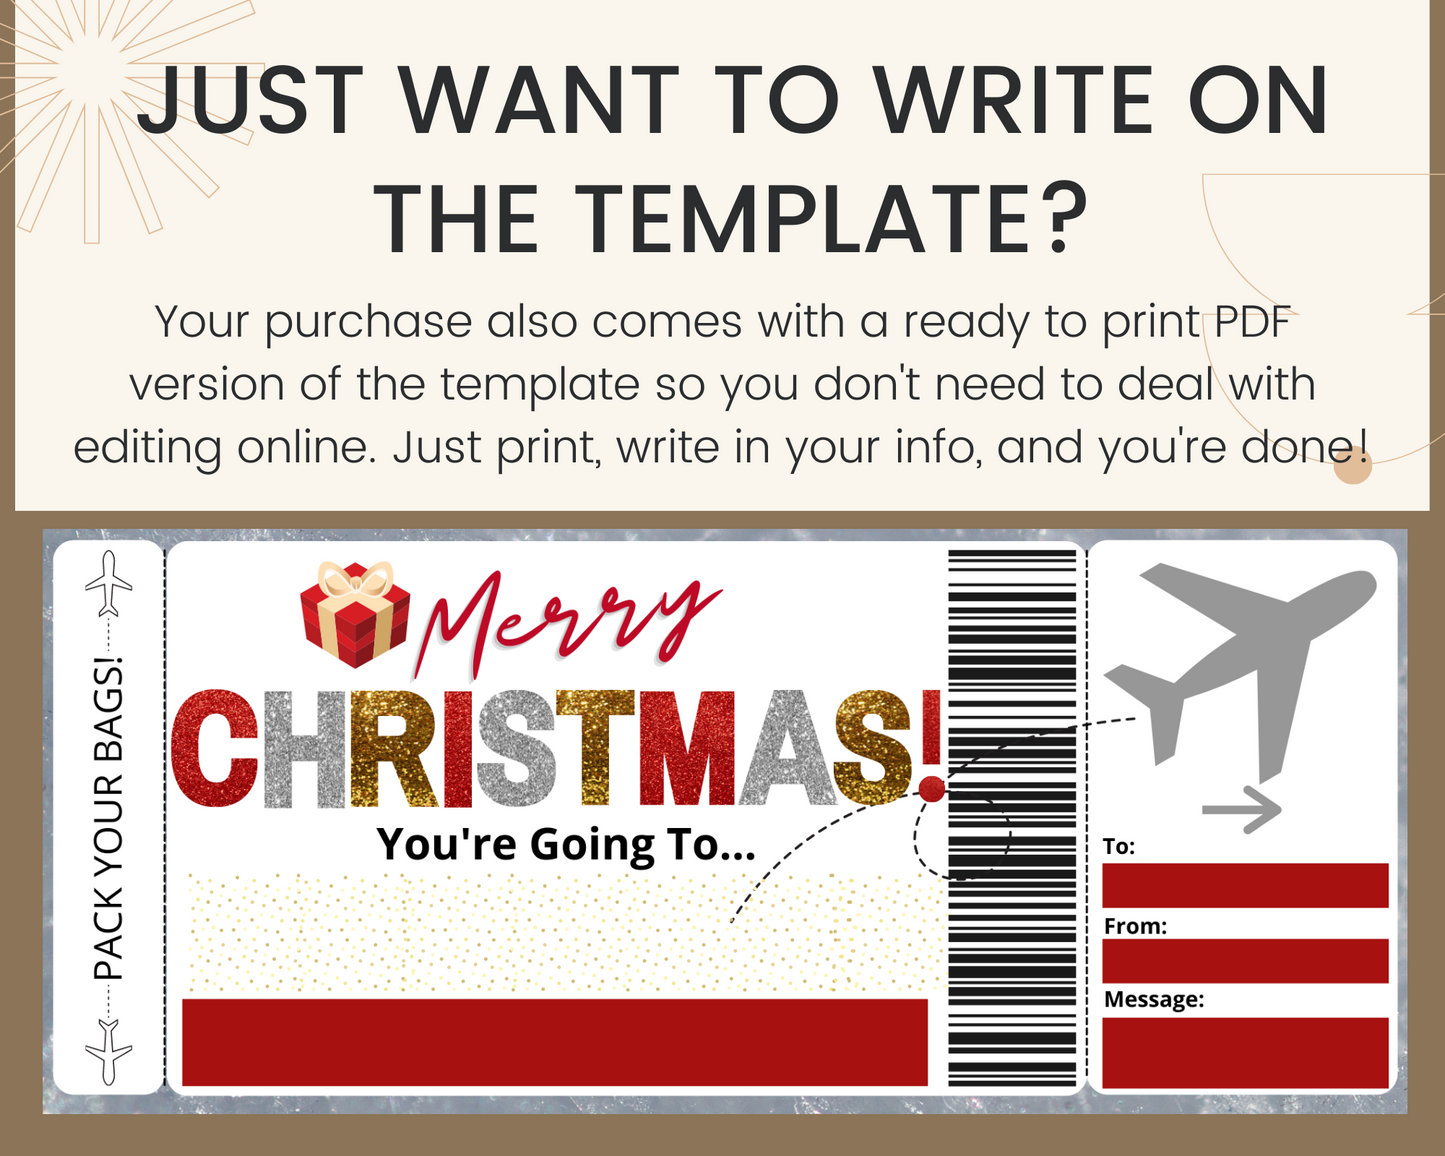 Christmas Boarding Ticket Template